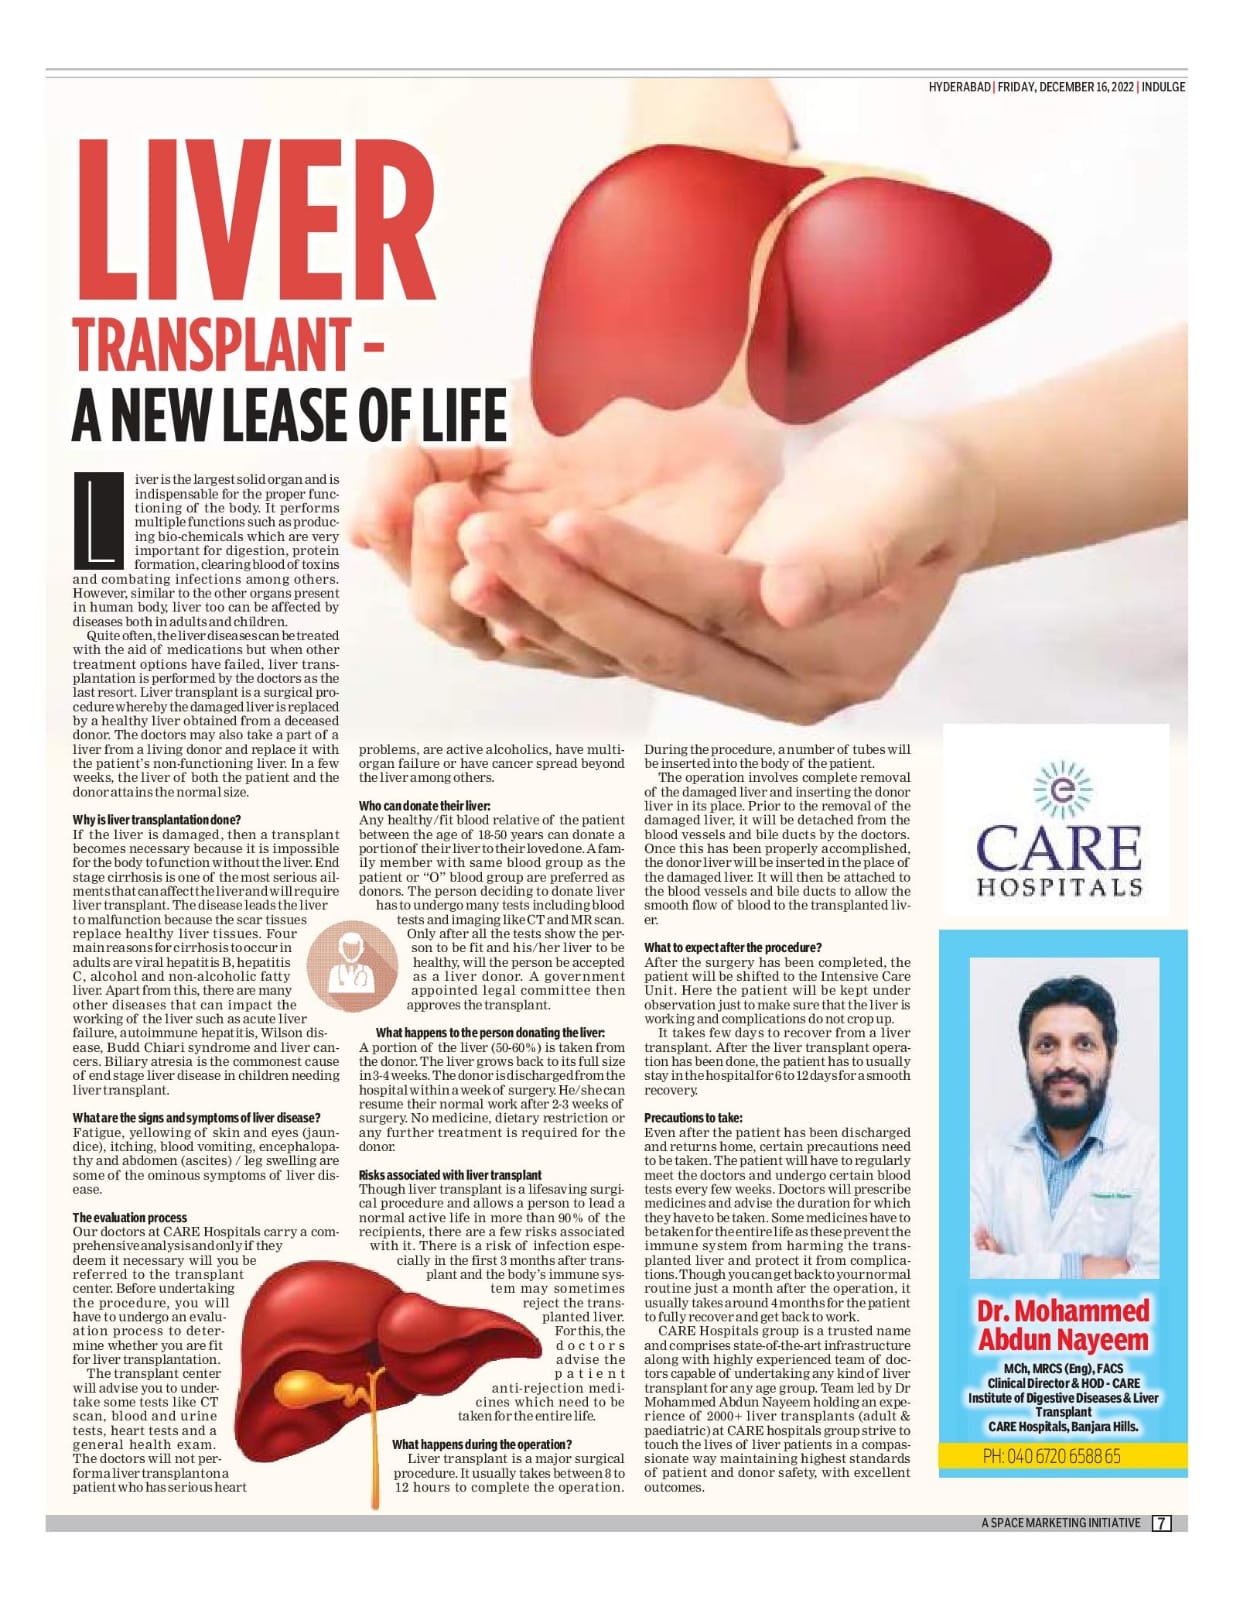 Liver Transplant - A New Lease of Life